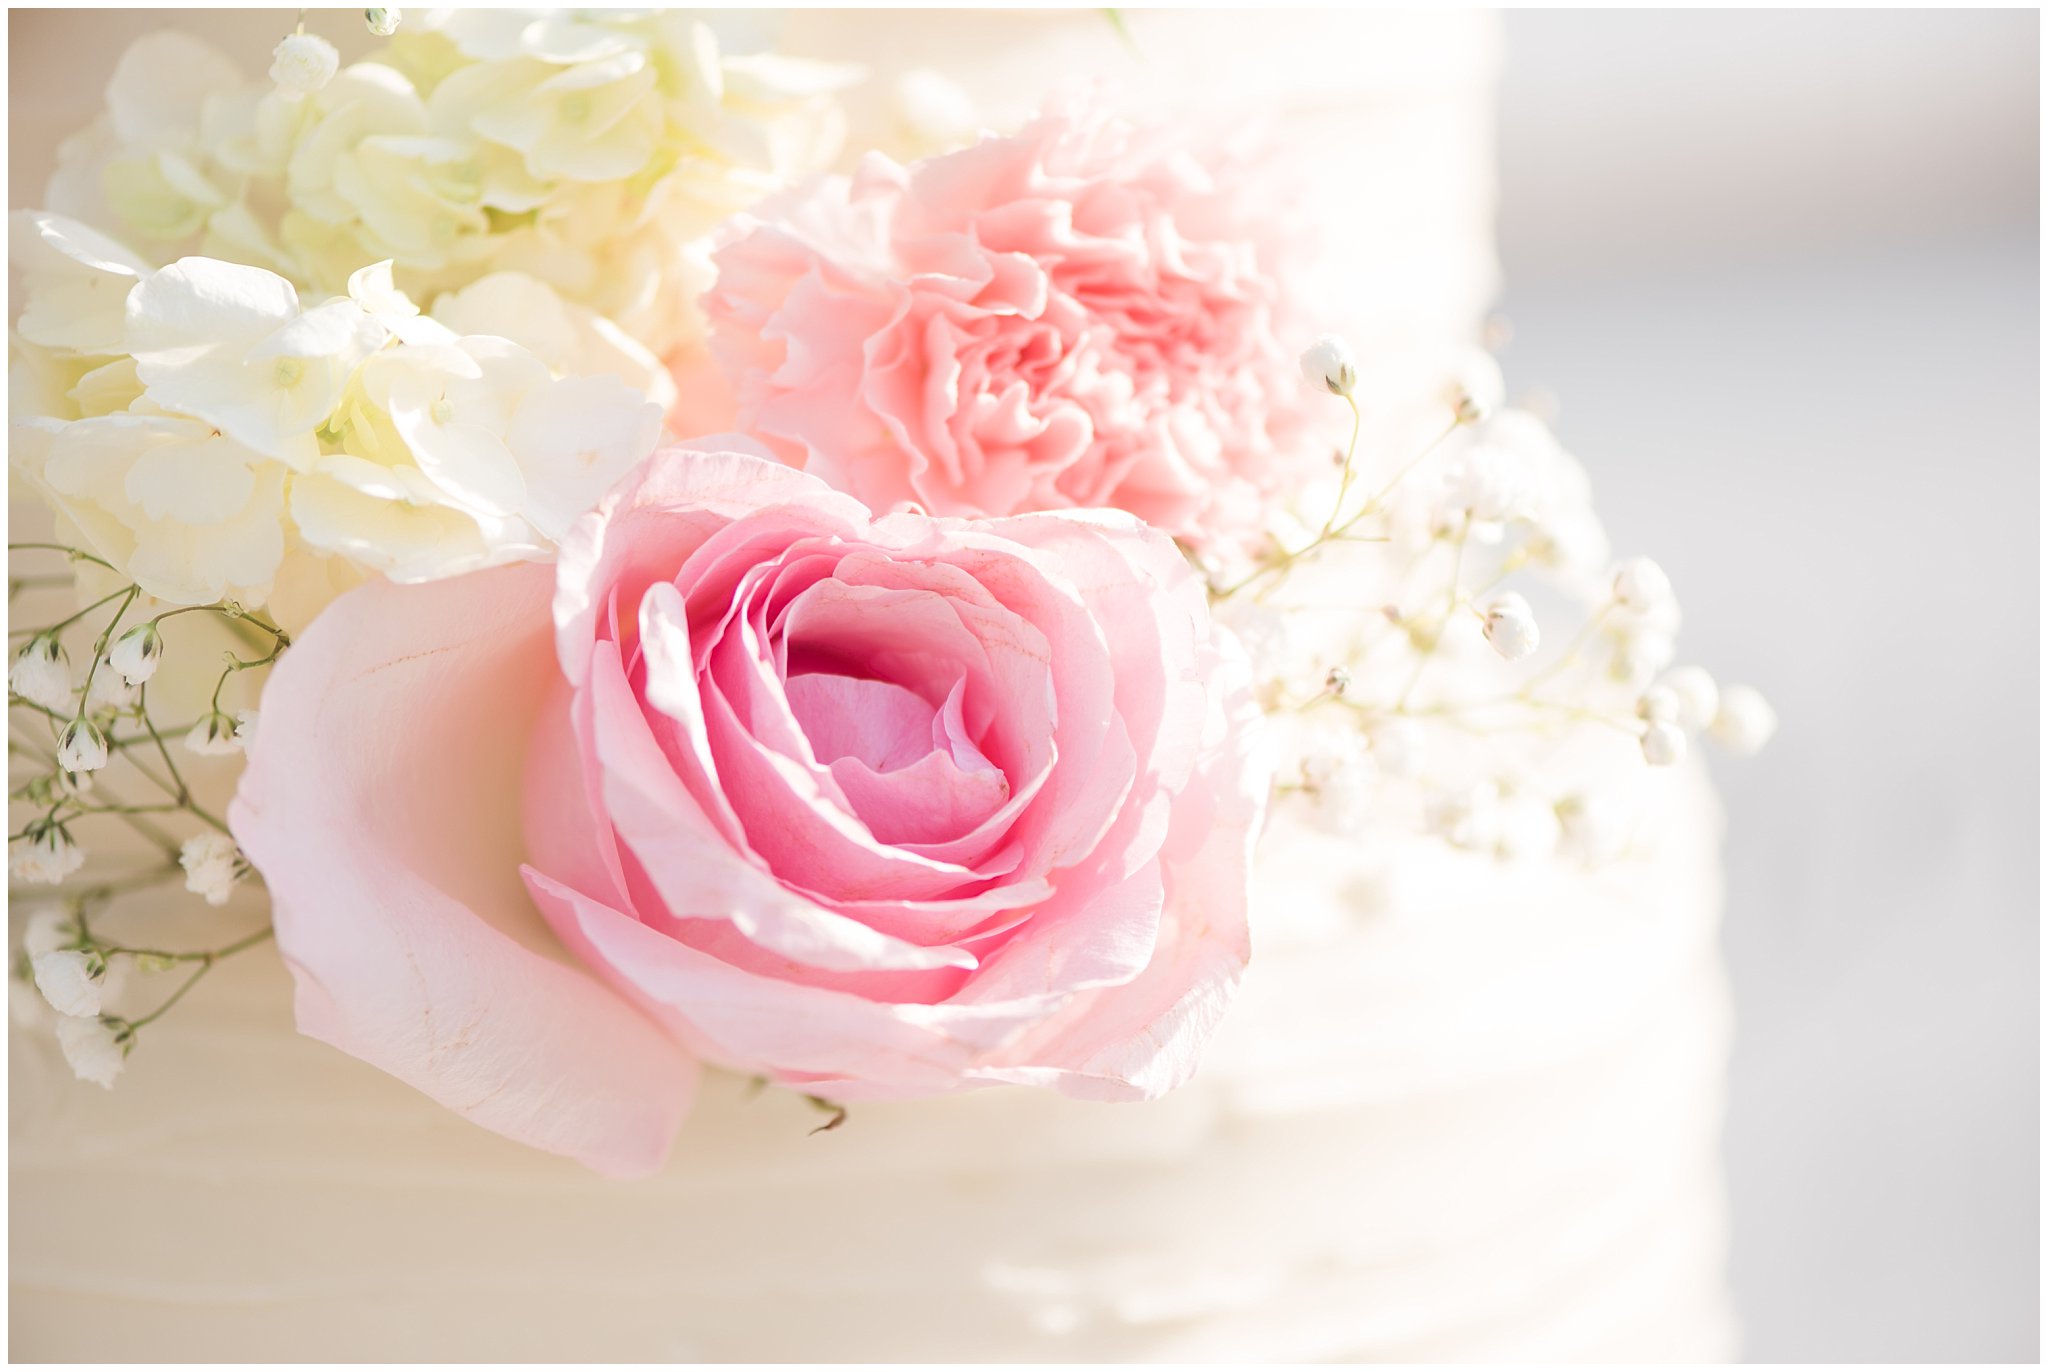 White ruffled wedding cake with pink roses | Backyard outdoor spring wedding with grey, blush, and light blue wedding colors | Spring Provo City Center Temple Wedding | Utah Wedding Photographers | Jessie and Dallin Photography